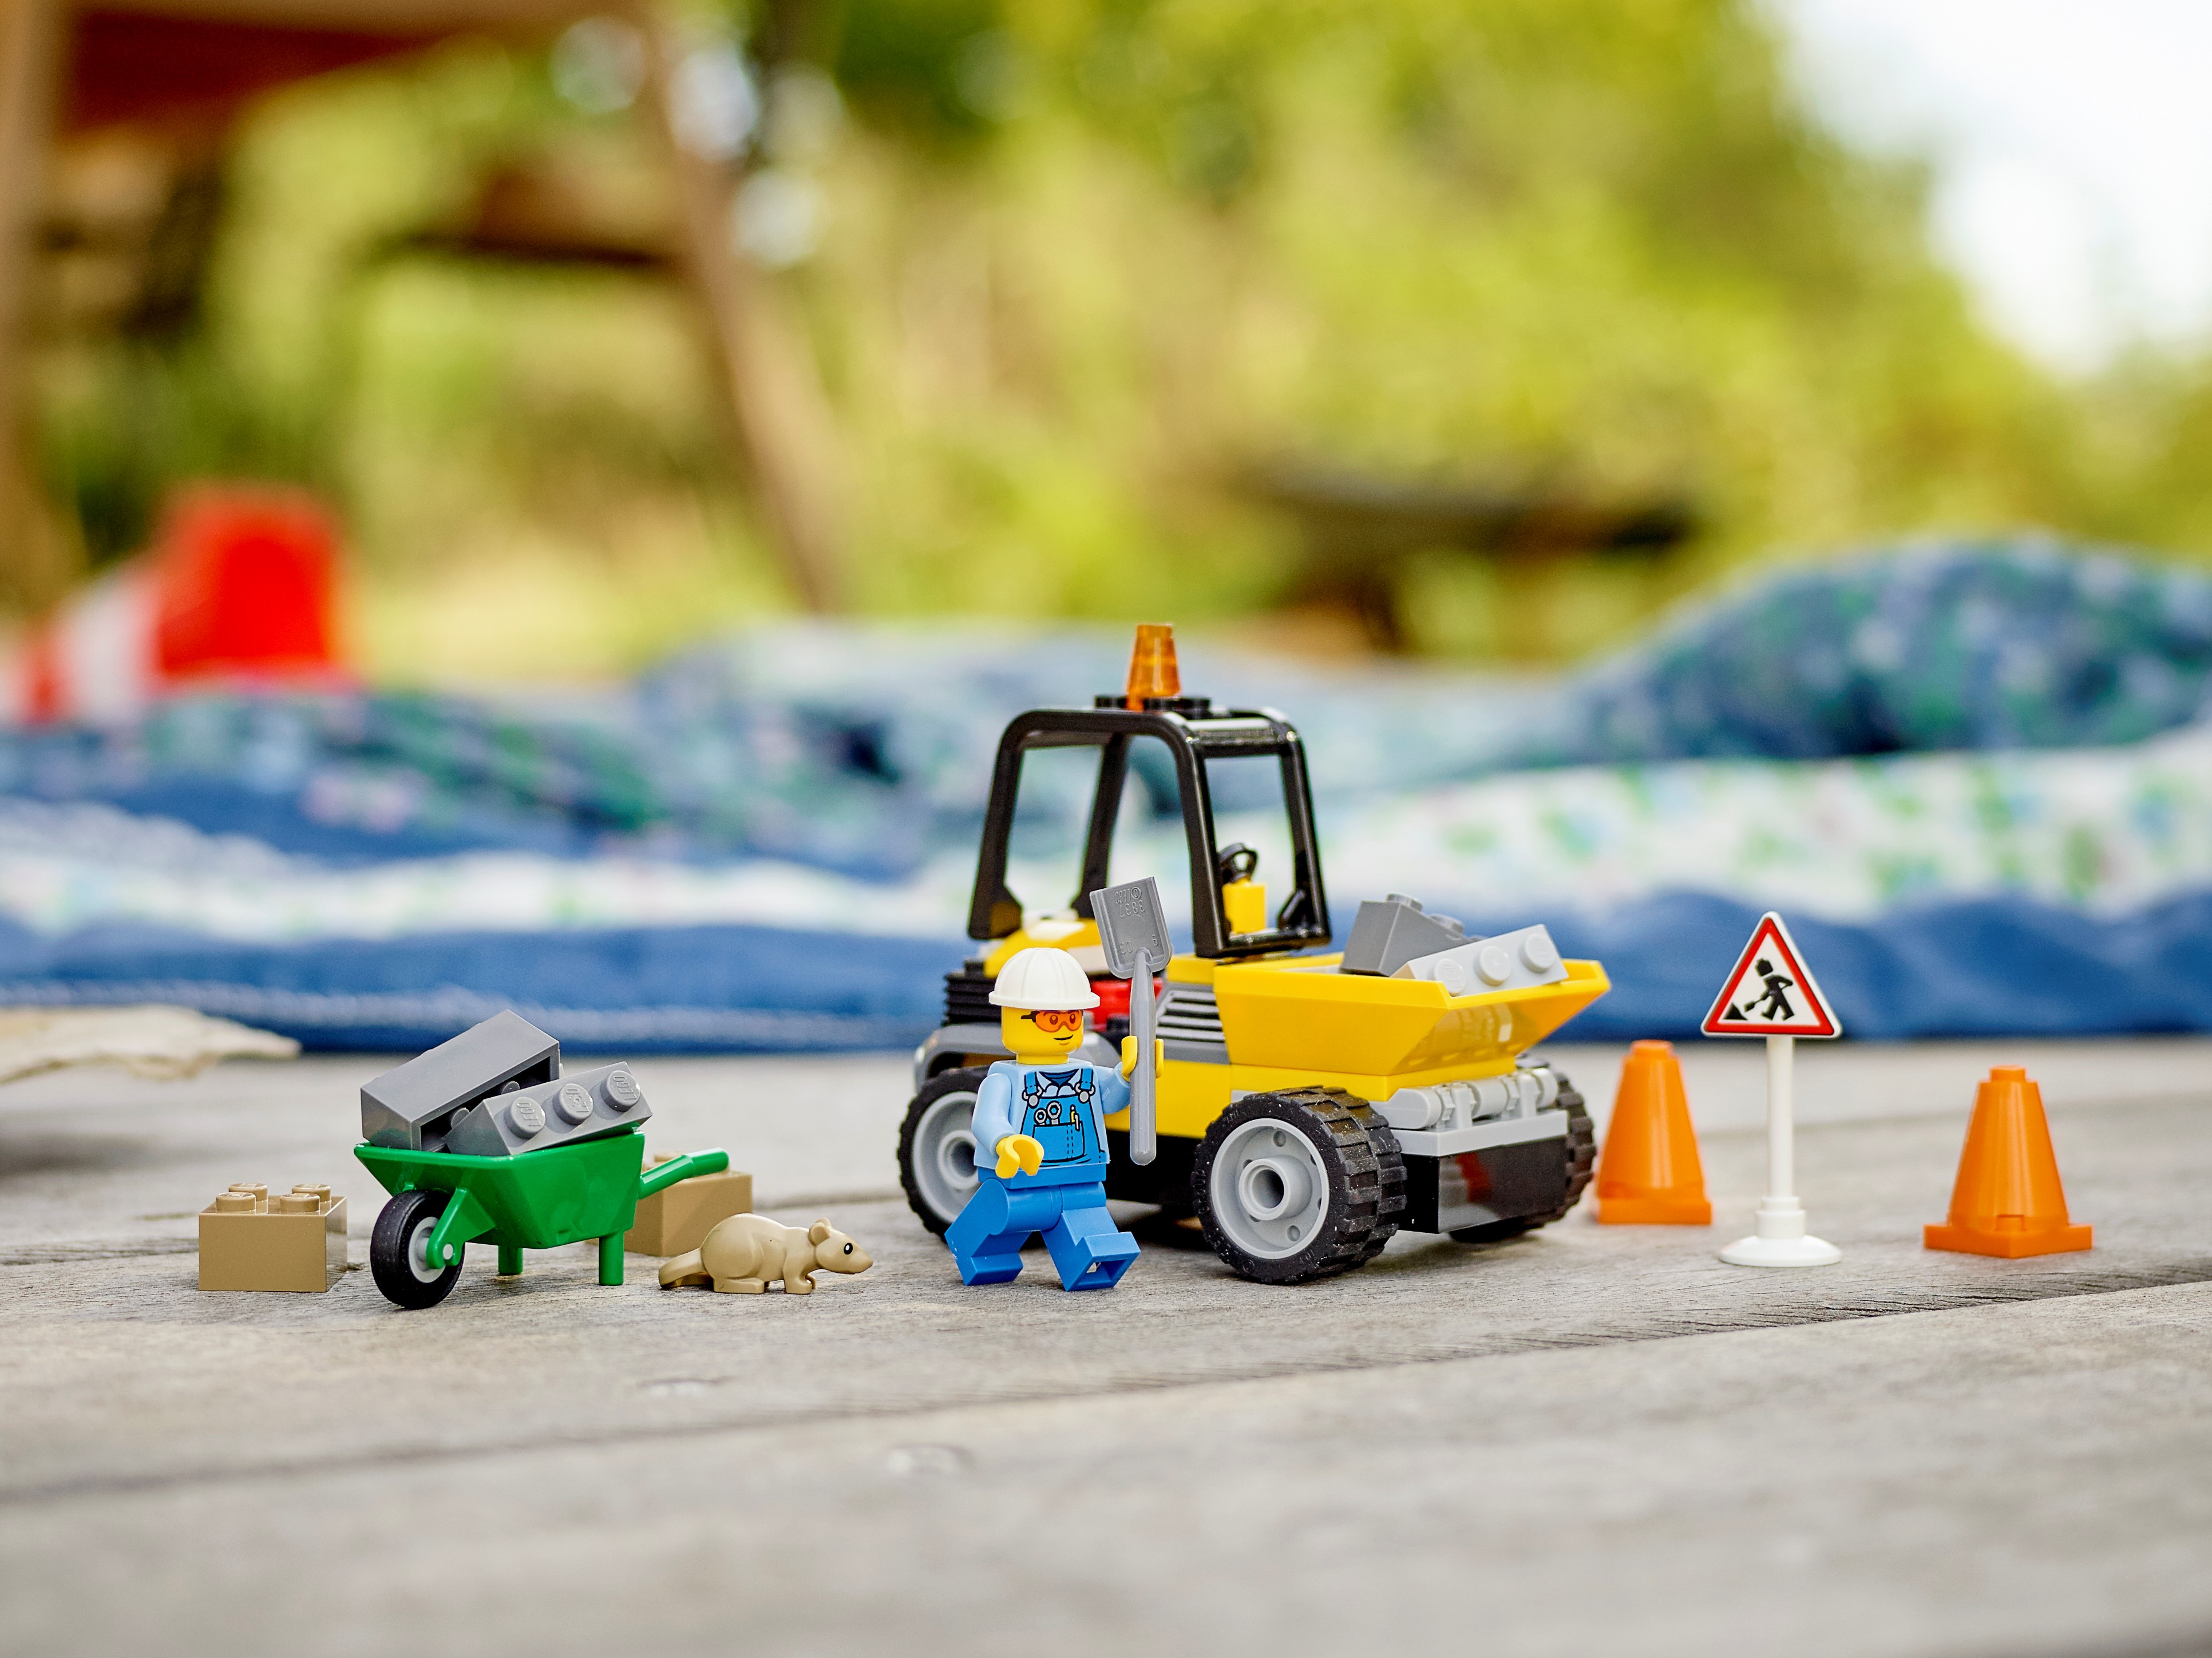 Official | Truck Roadwork Buy US 60284 the | LEGO® City at Shop online